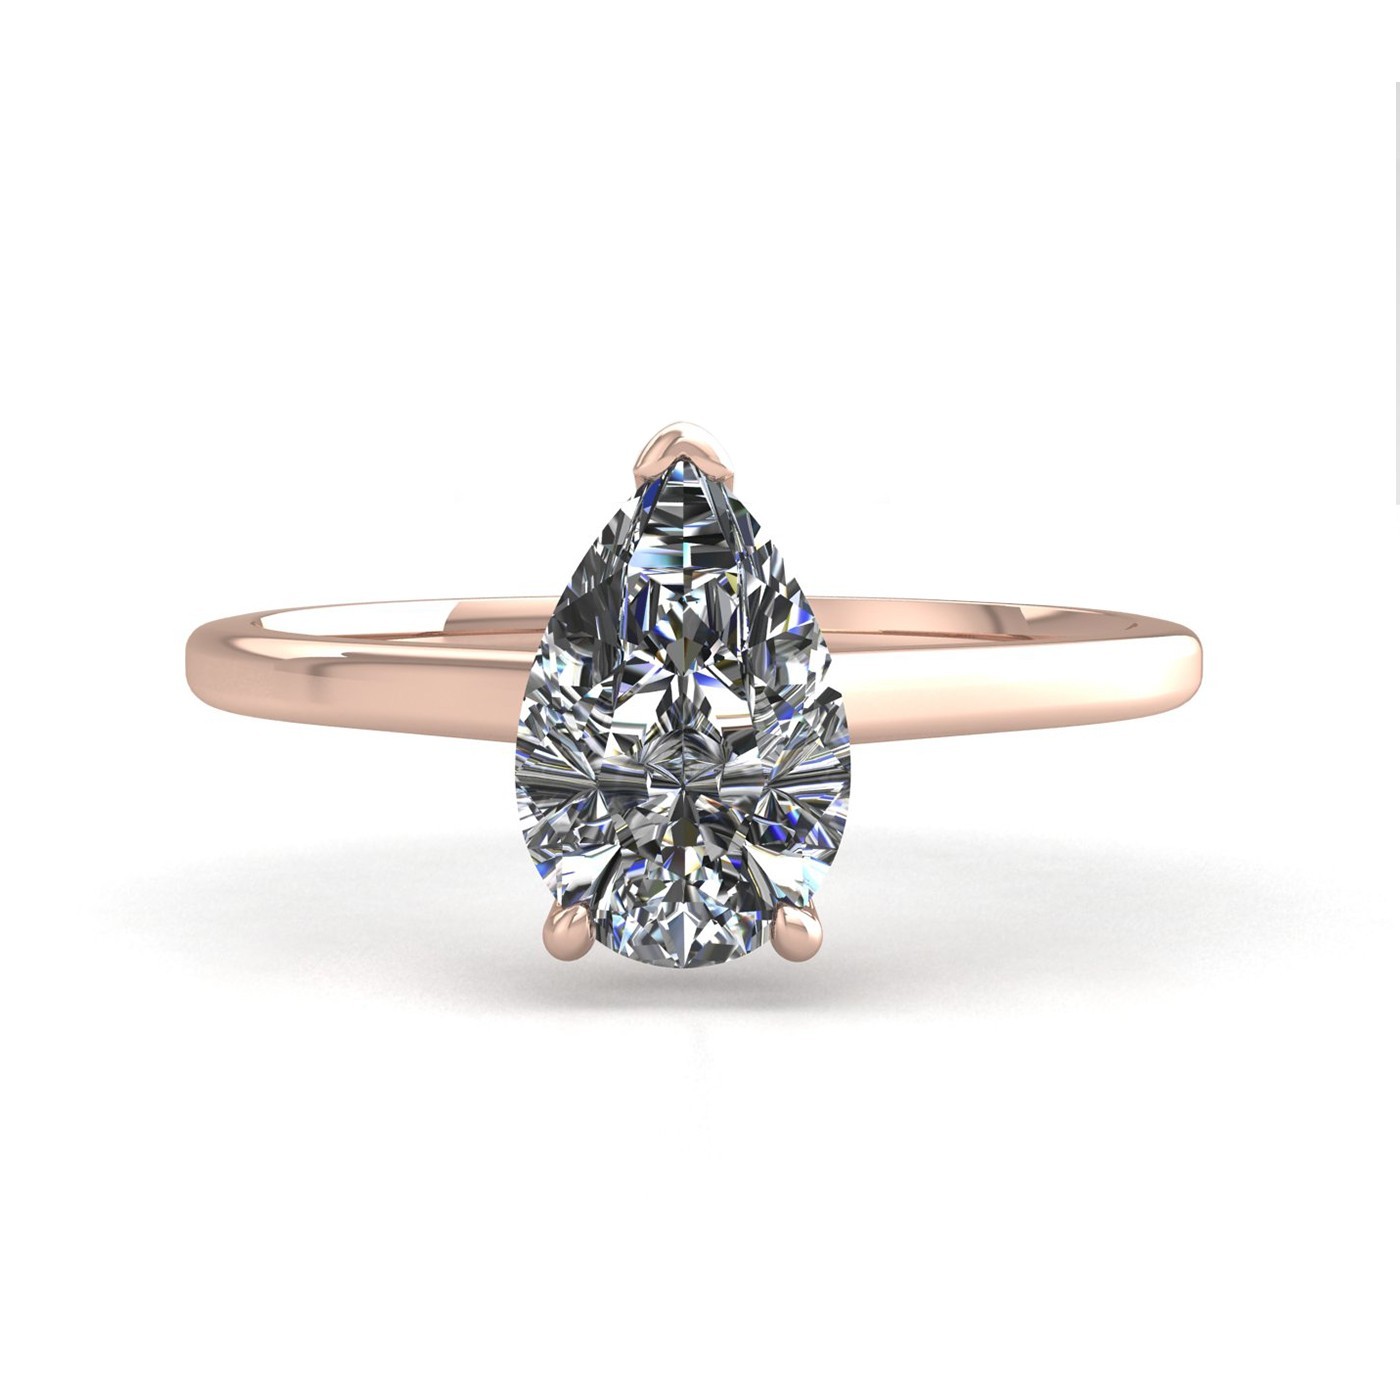 18k rose gold  2,00 ct 3 prongs solitaire pear cut diamond engagement ring with whisper thin band Photos & images